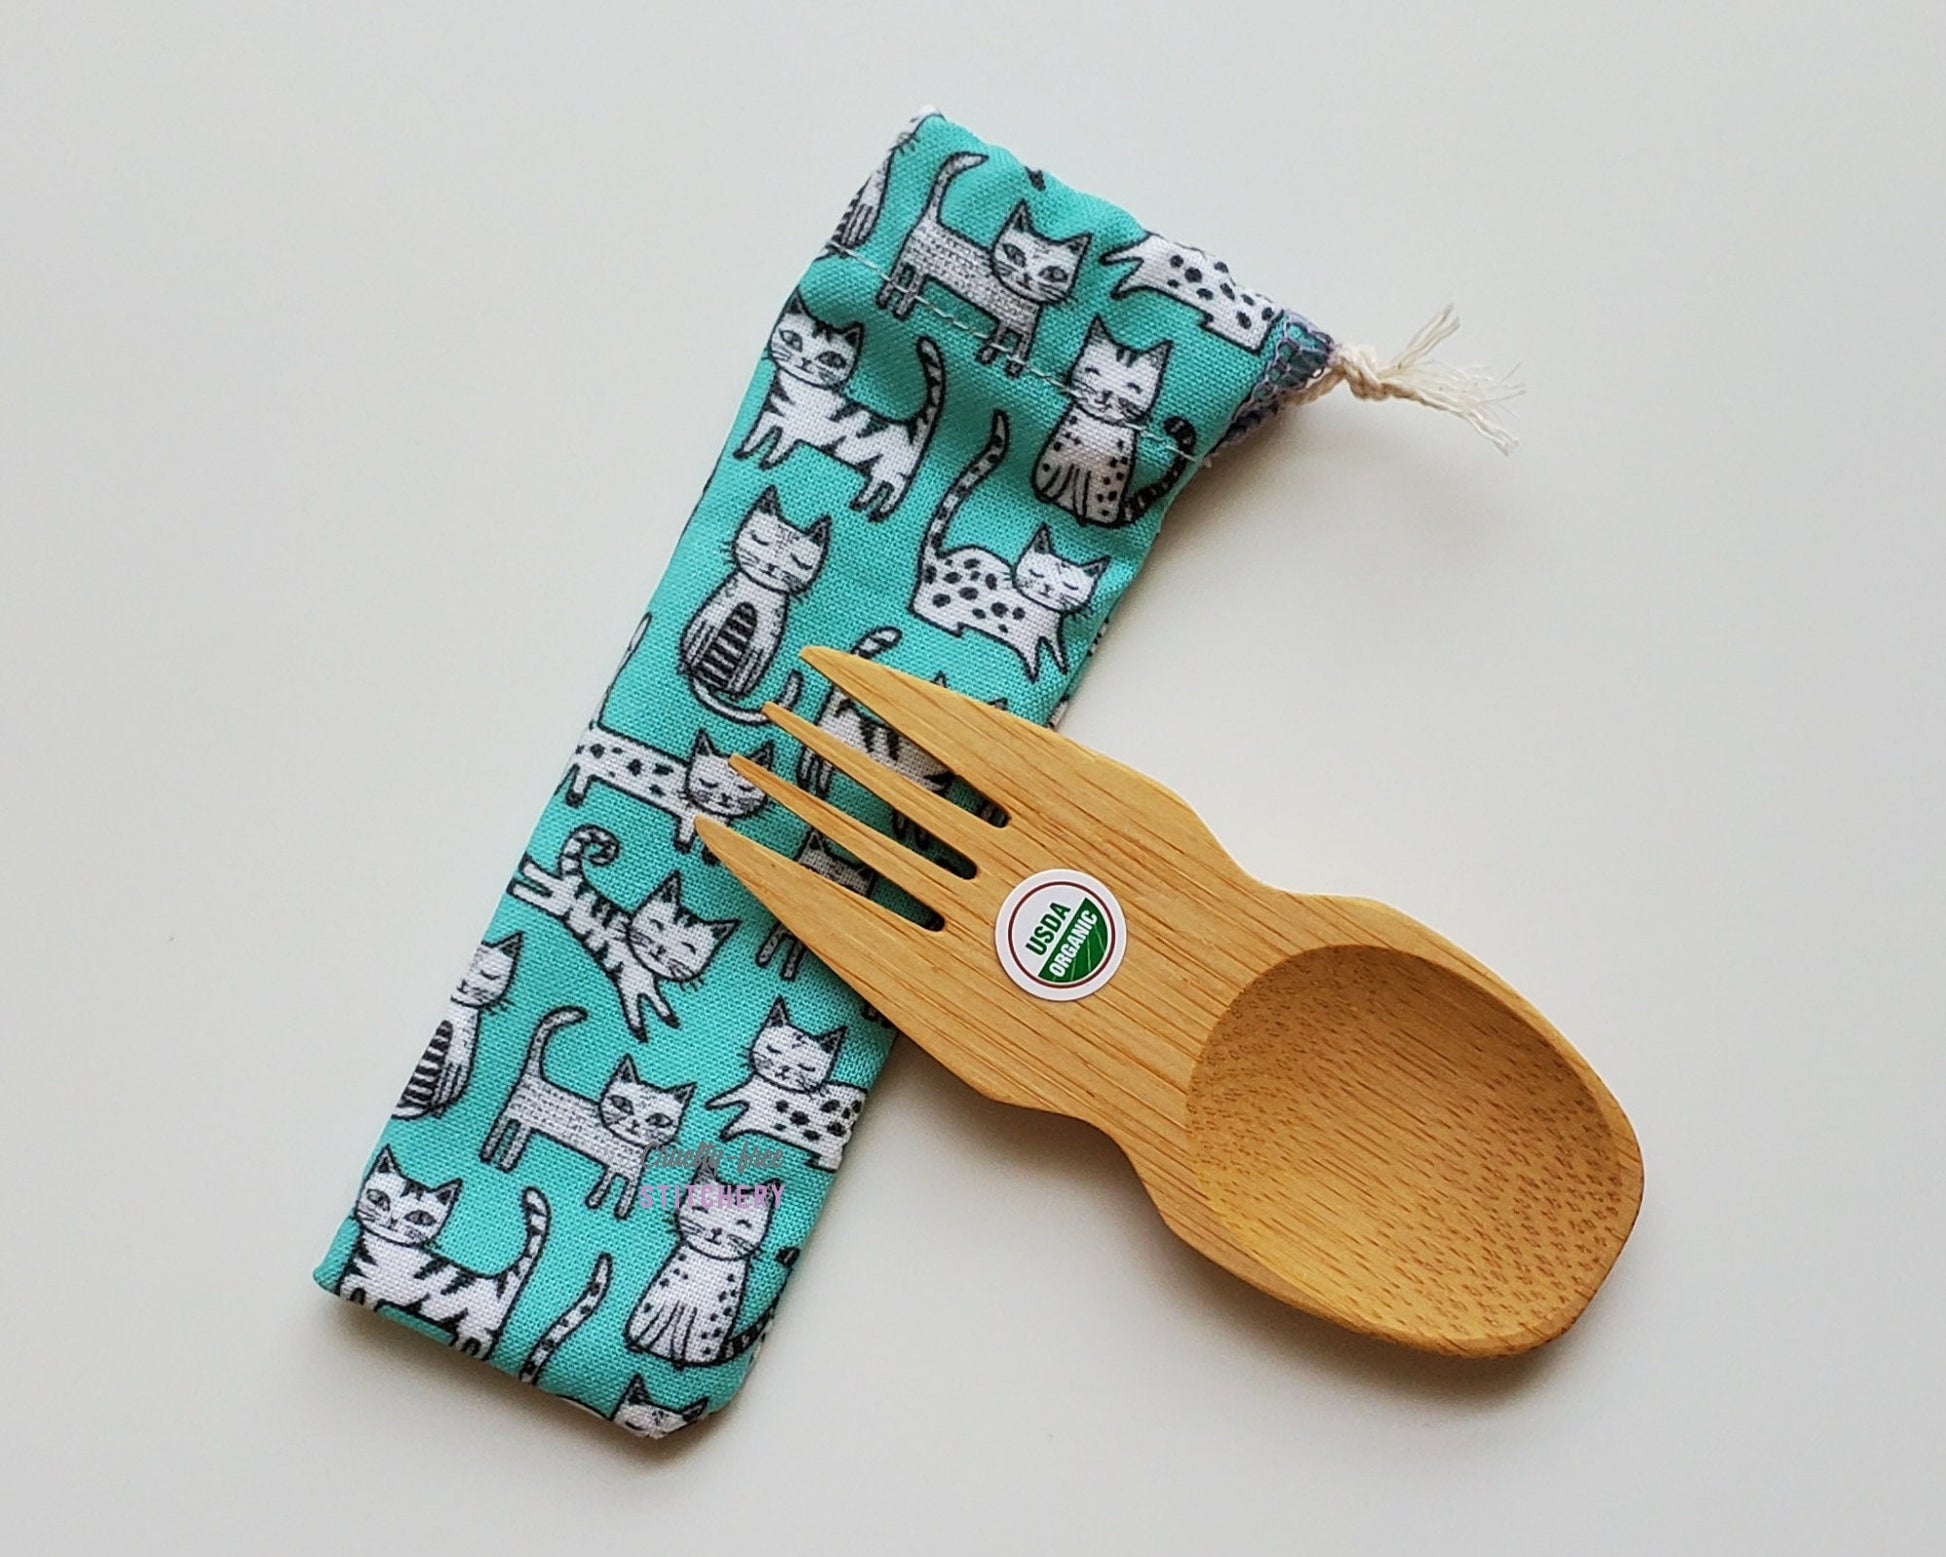 Blue with white cats print reusable spork pouch. The pouch is sitting diagonally with the spork partially on top pointing the other way. The fork end of the spork is pointing to the left.